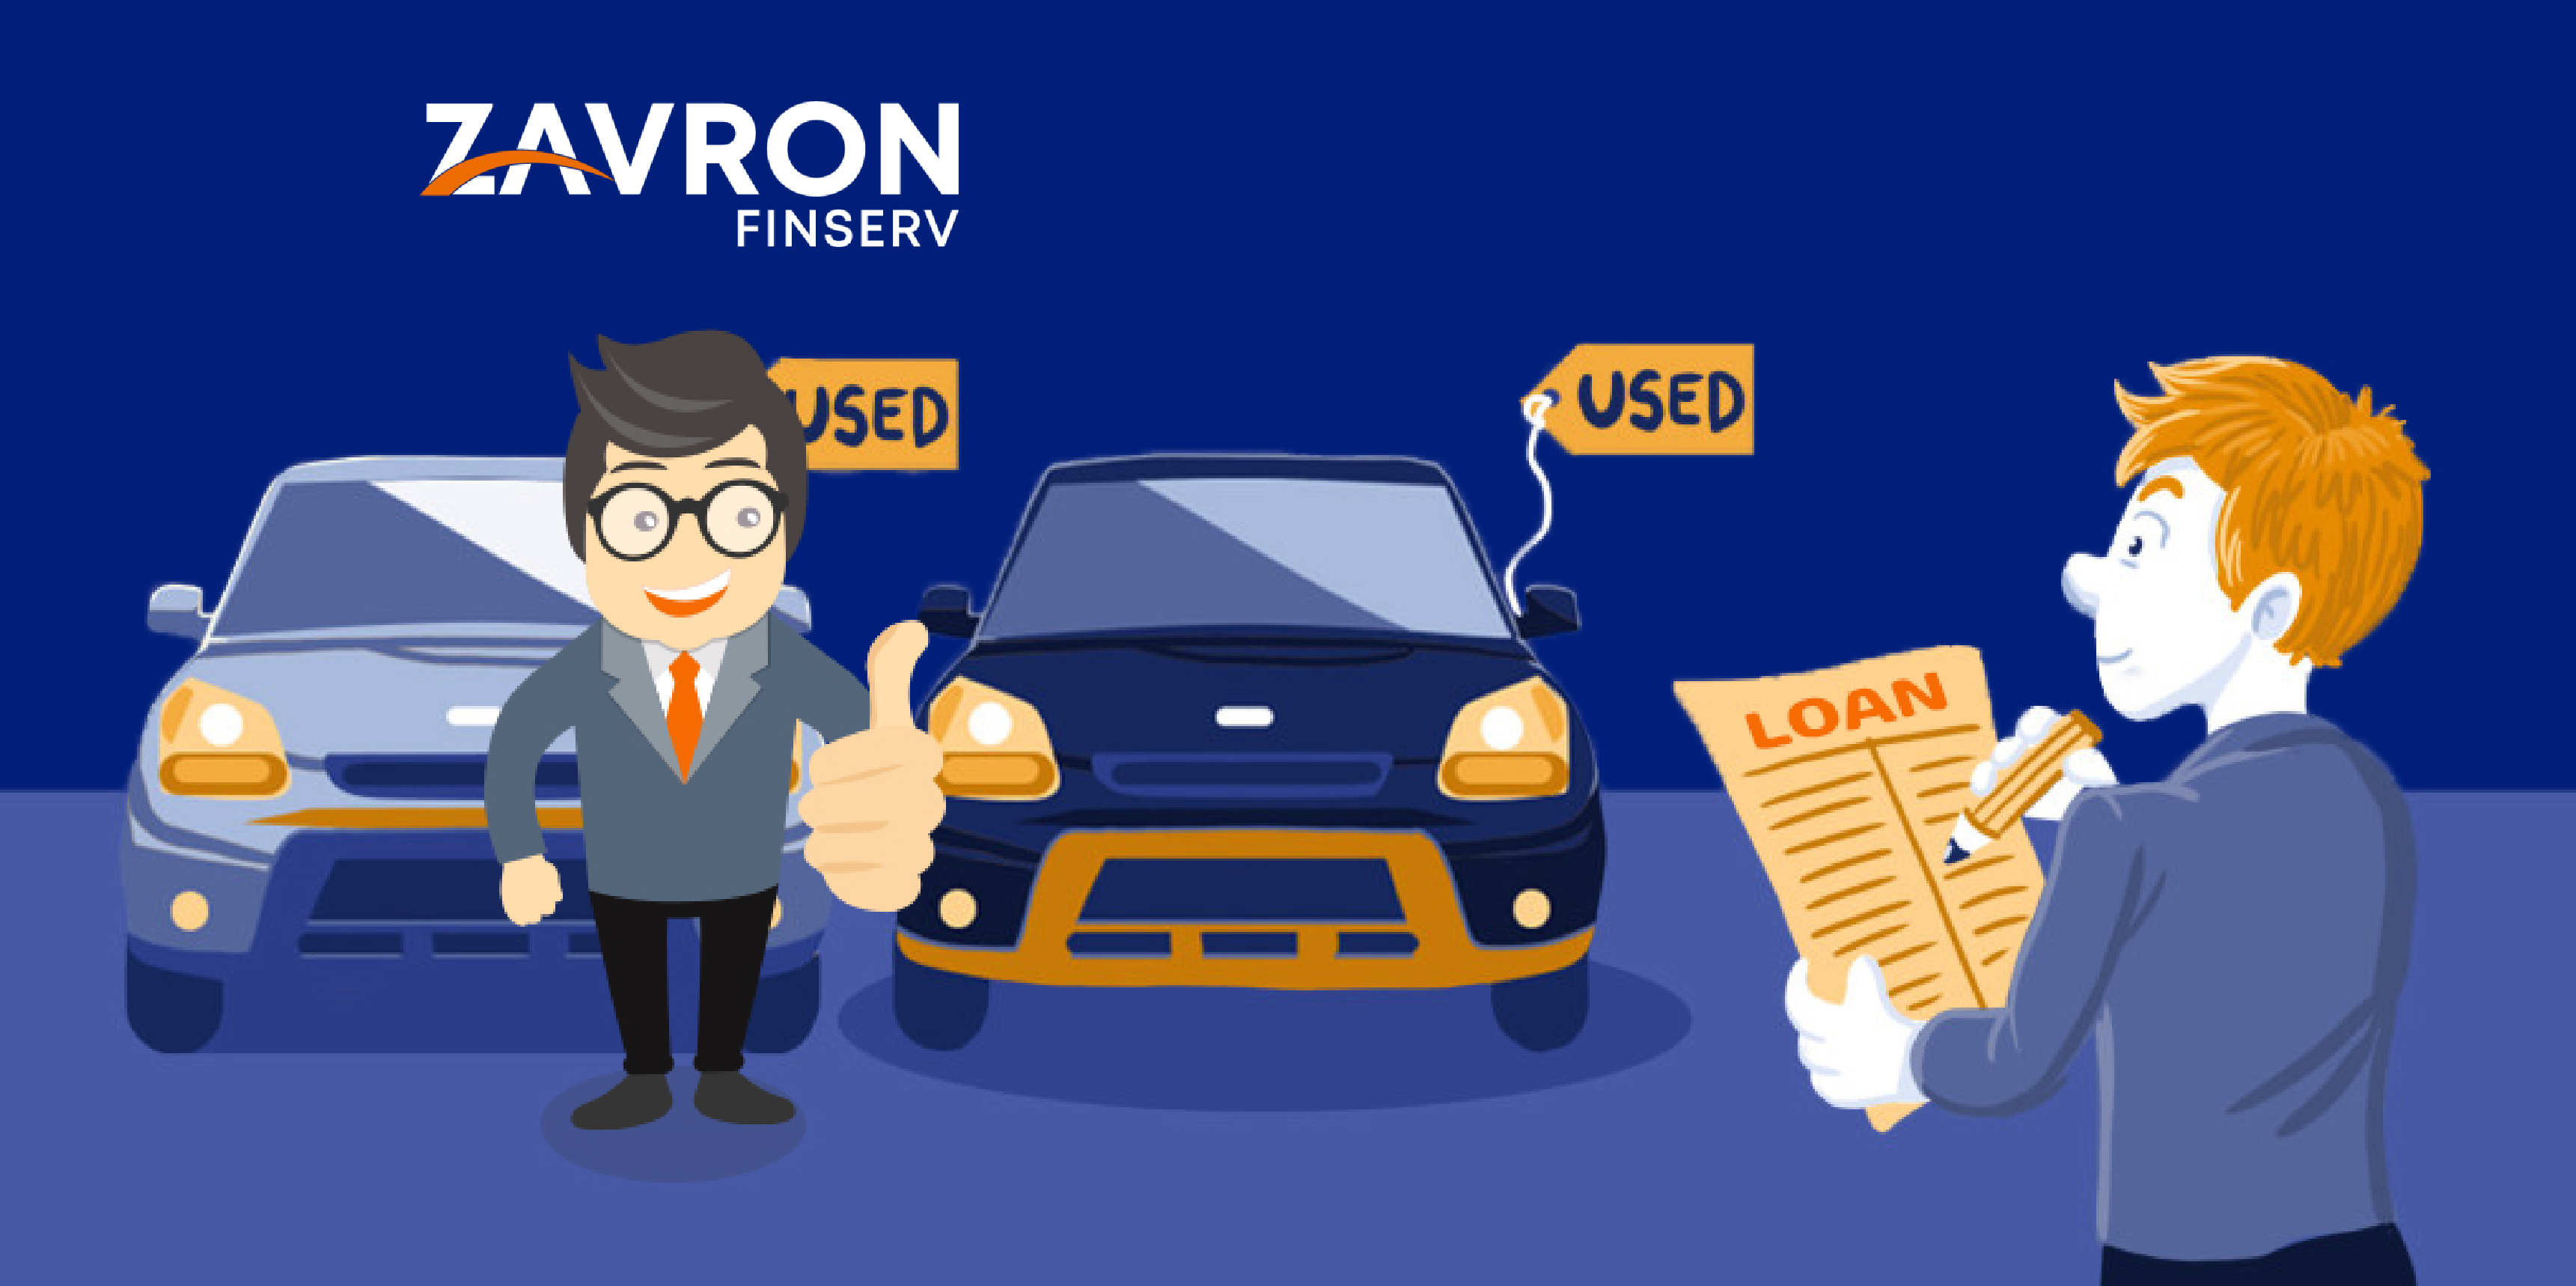 New Car Loan VS Used Car Loan: What's The Difference?